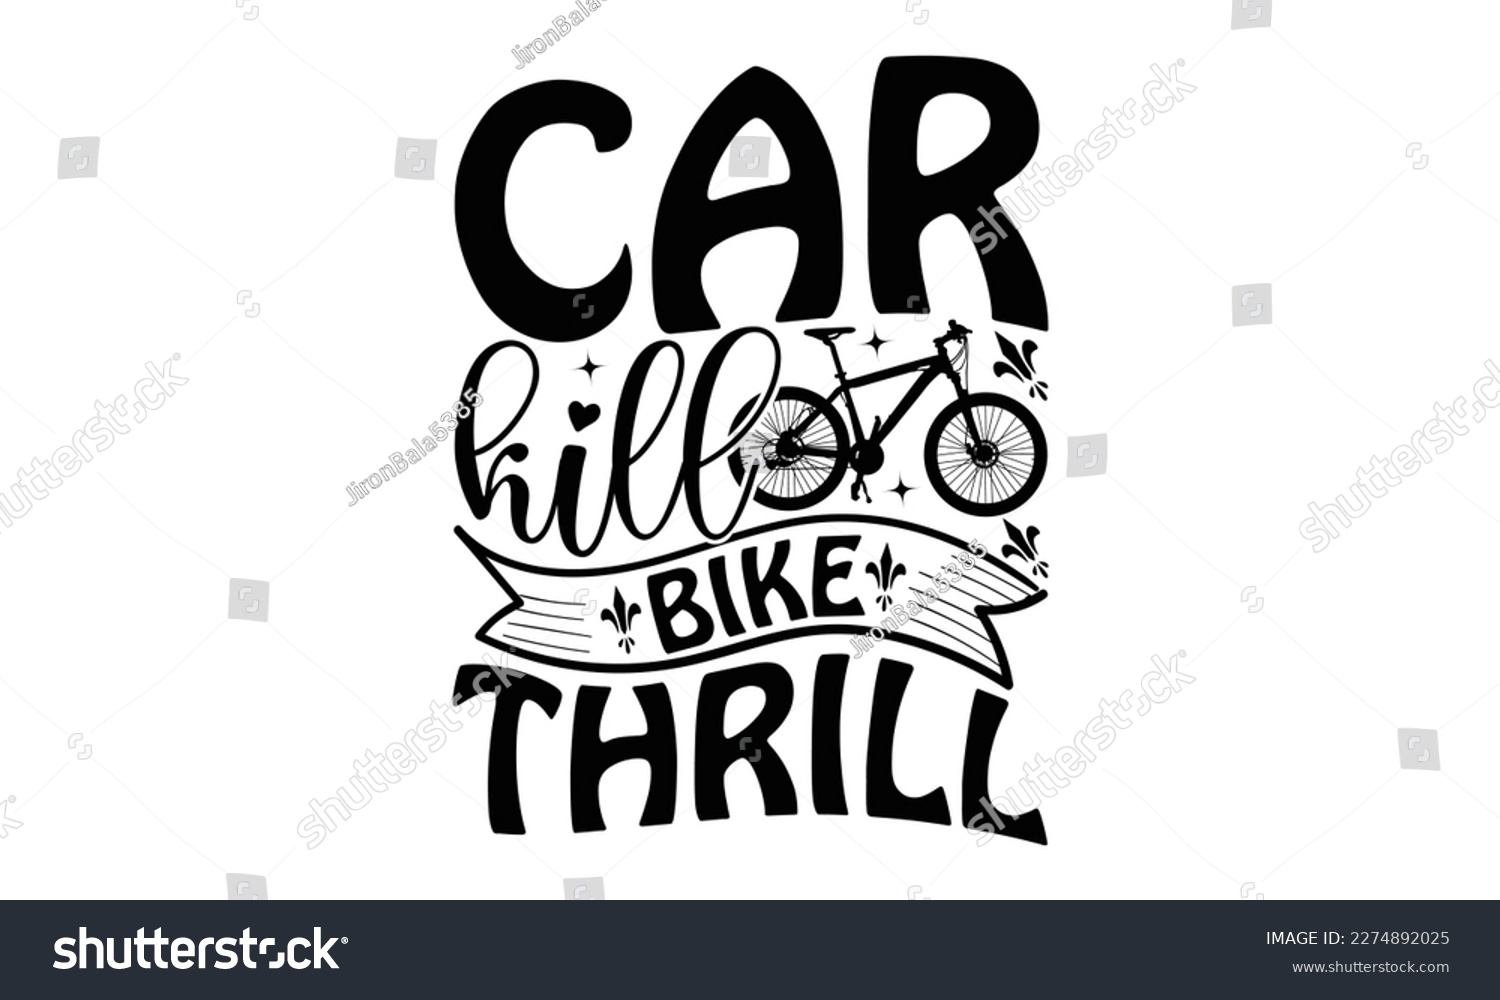 SVG of Car Kill Bike Thrill - Cycle SVG Design, Calligraphy graphic design, Illustration for prints on t-shirts, bags, posters and cards, for Cutting Machine, Silhouette Cameo, Cricut. svg